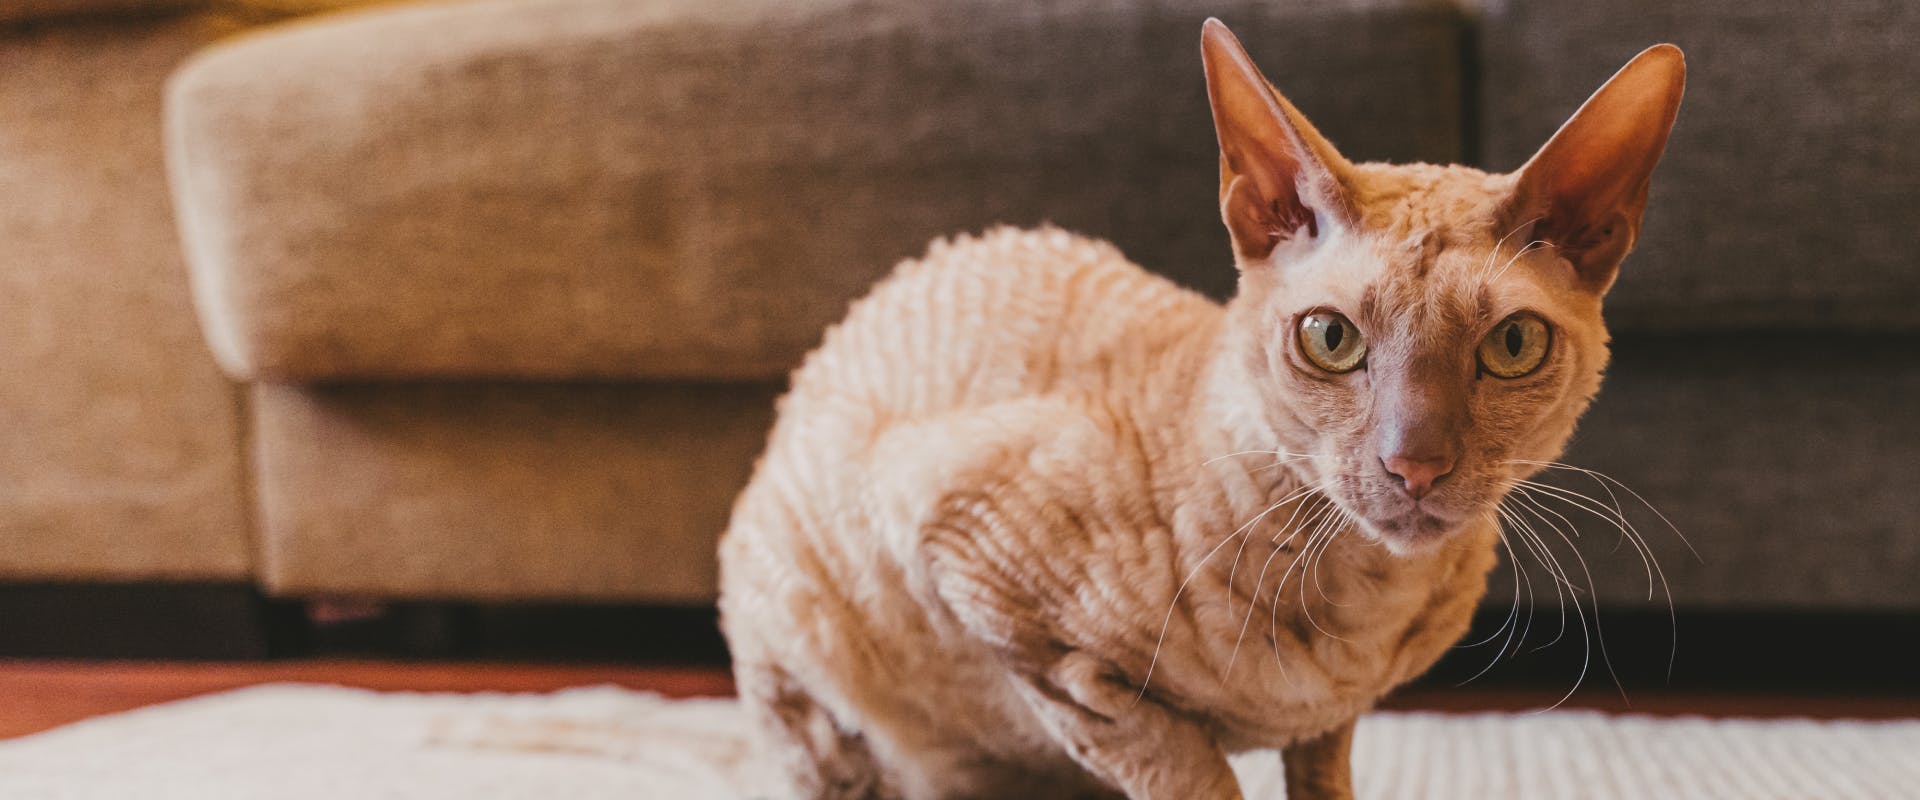 A Peterbald cat in the living room.